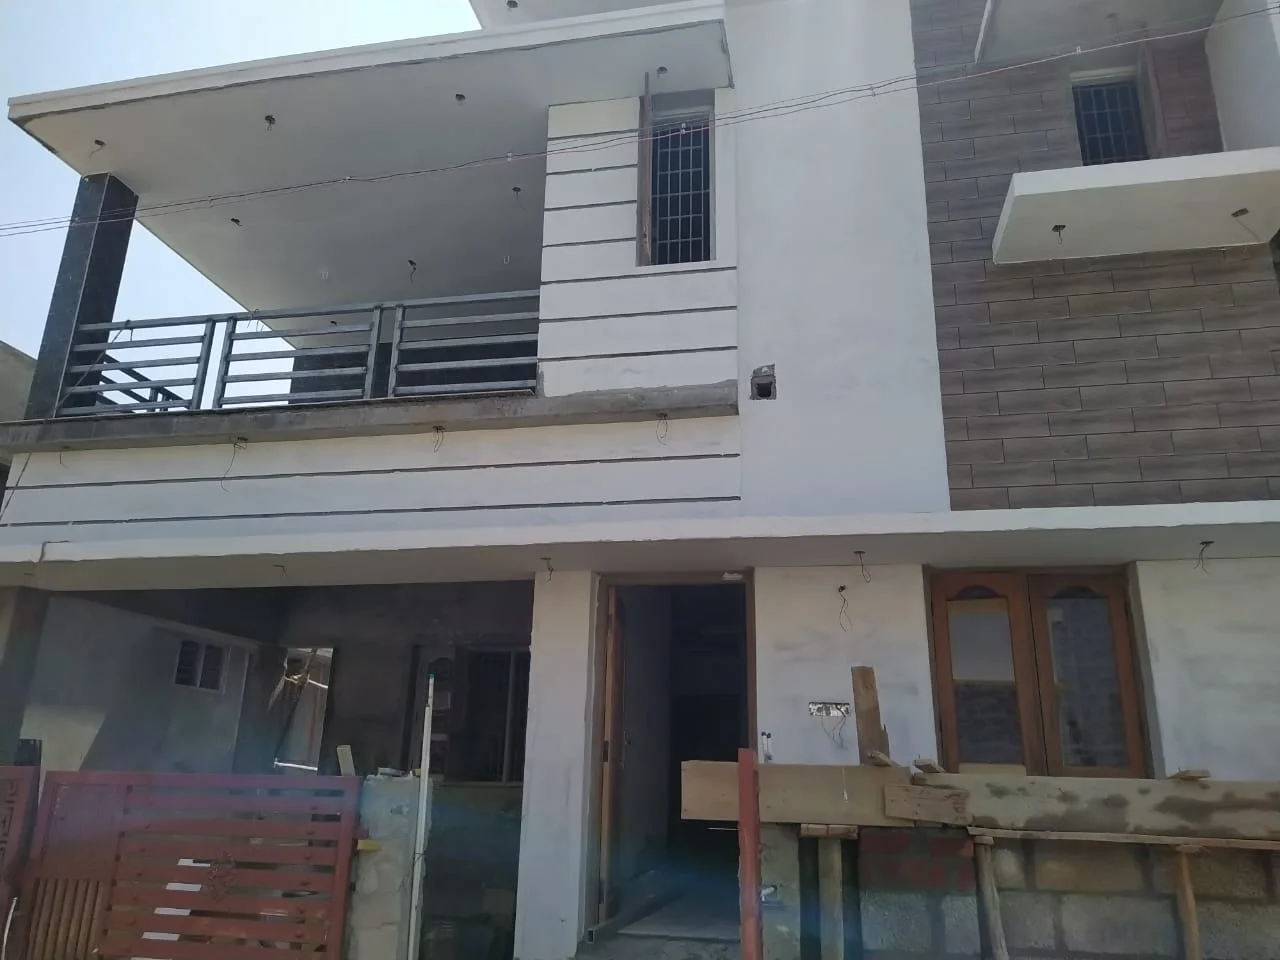 House for sale in asaripallam